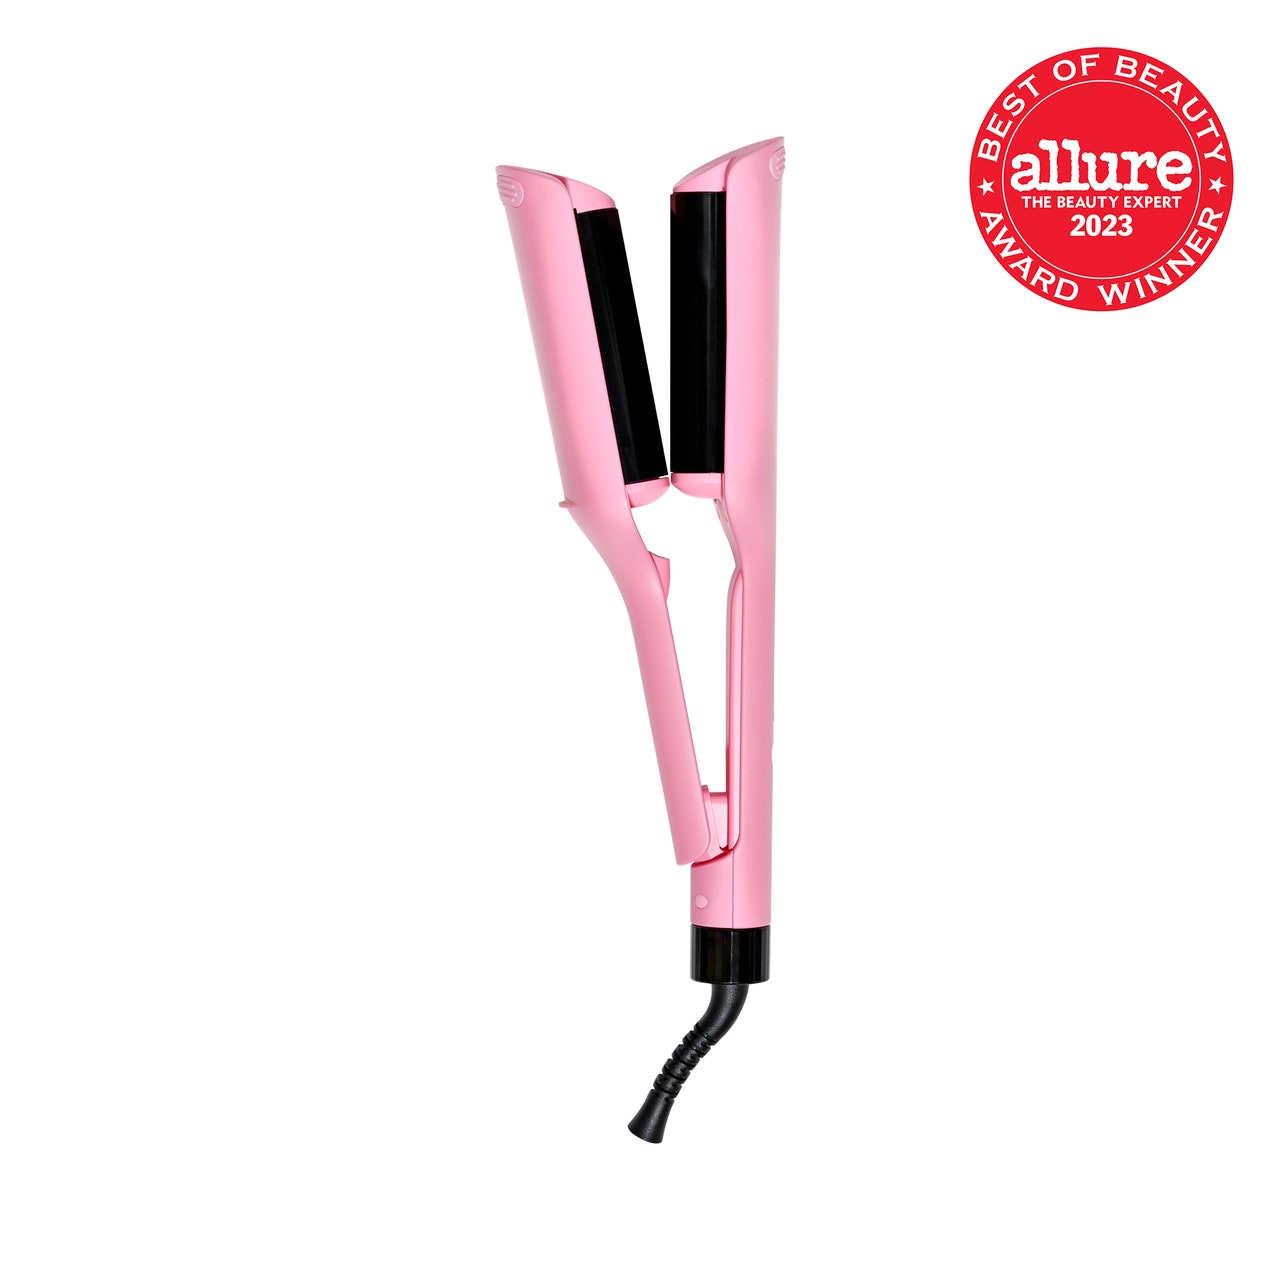 Trademark Beauty Babe Waves X pink hair waver on white background with red Allure BoB seal in the top right corner